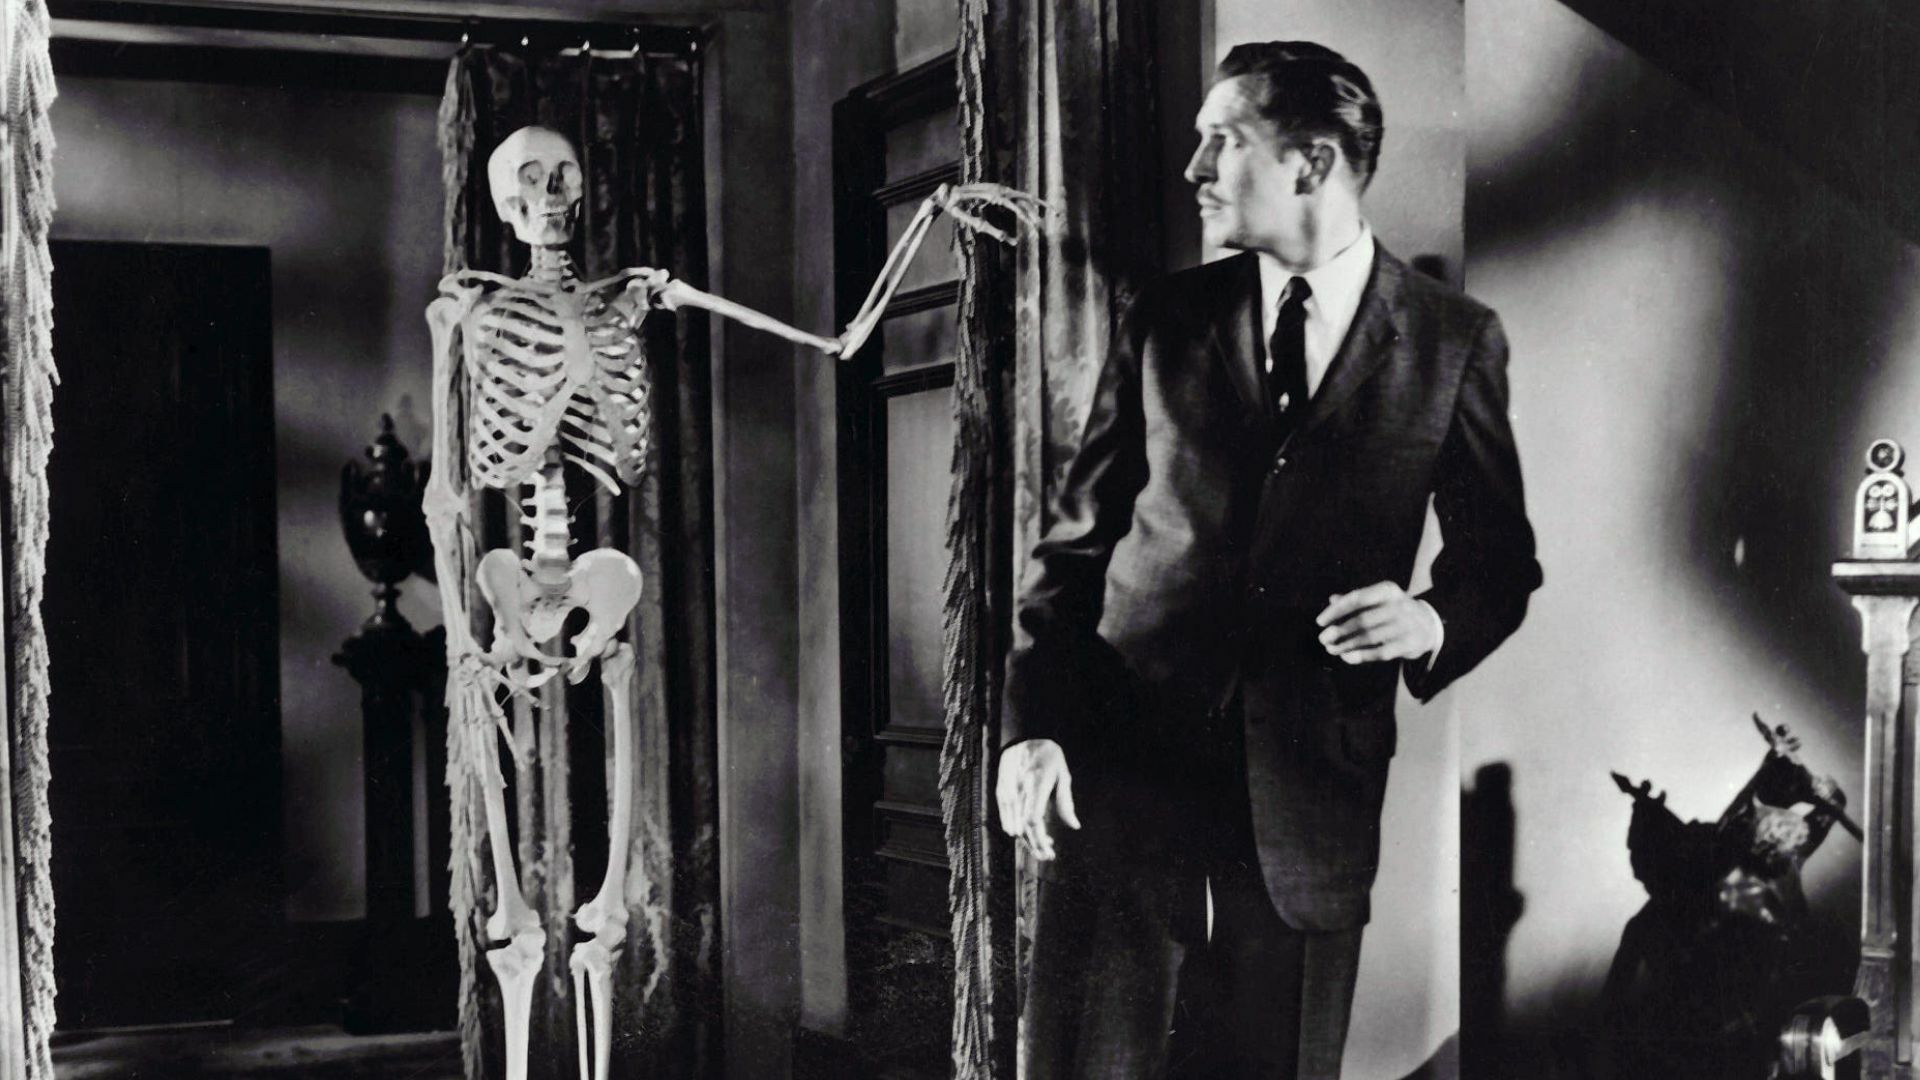 Vincent Price in "House on Haunted Hill"